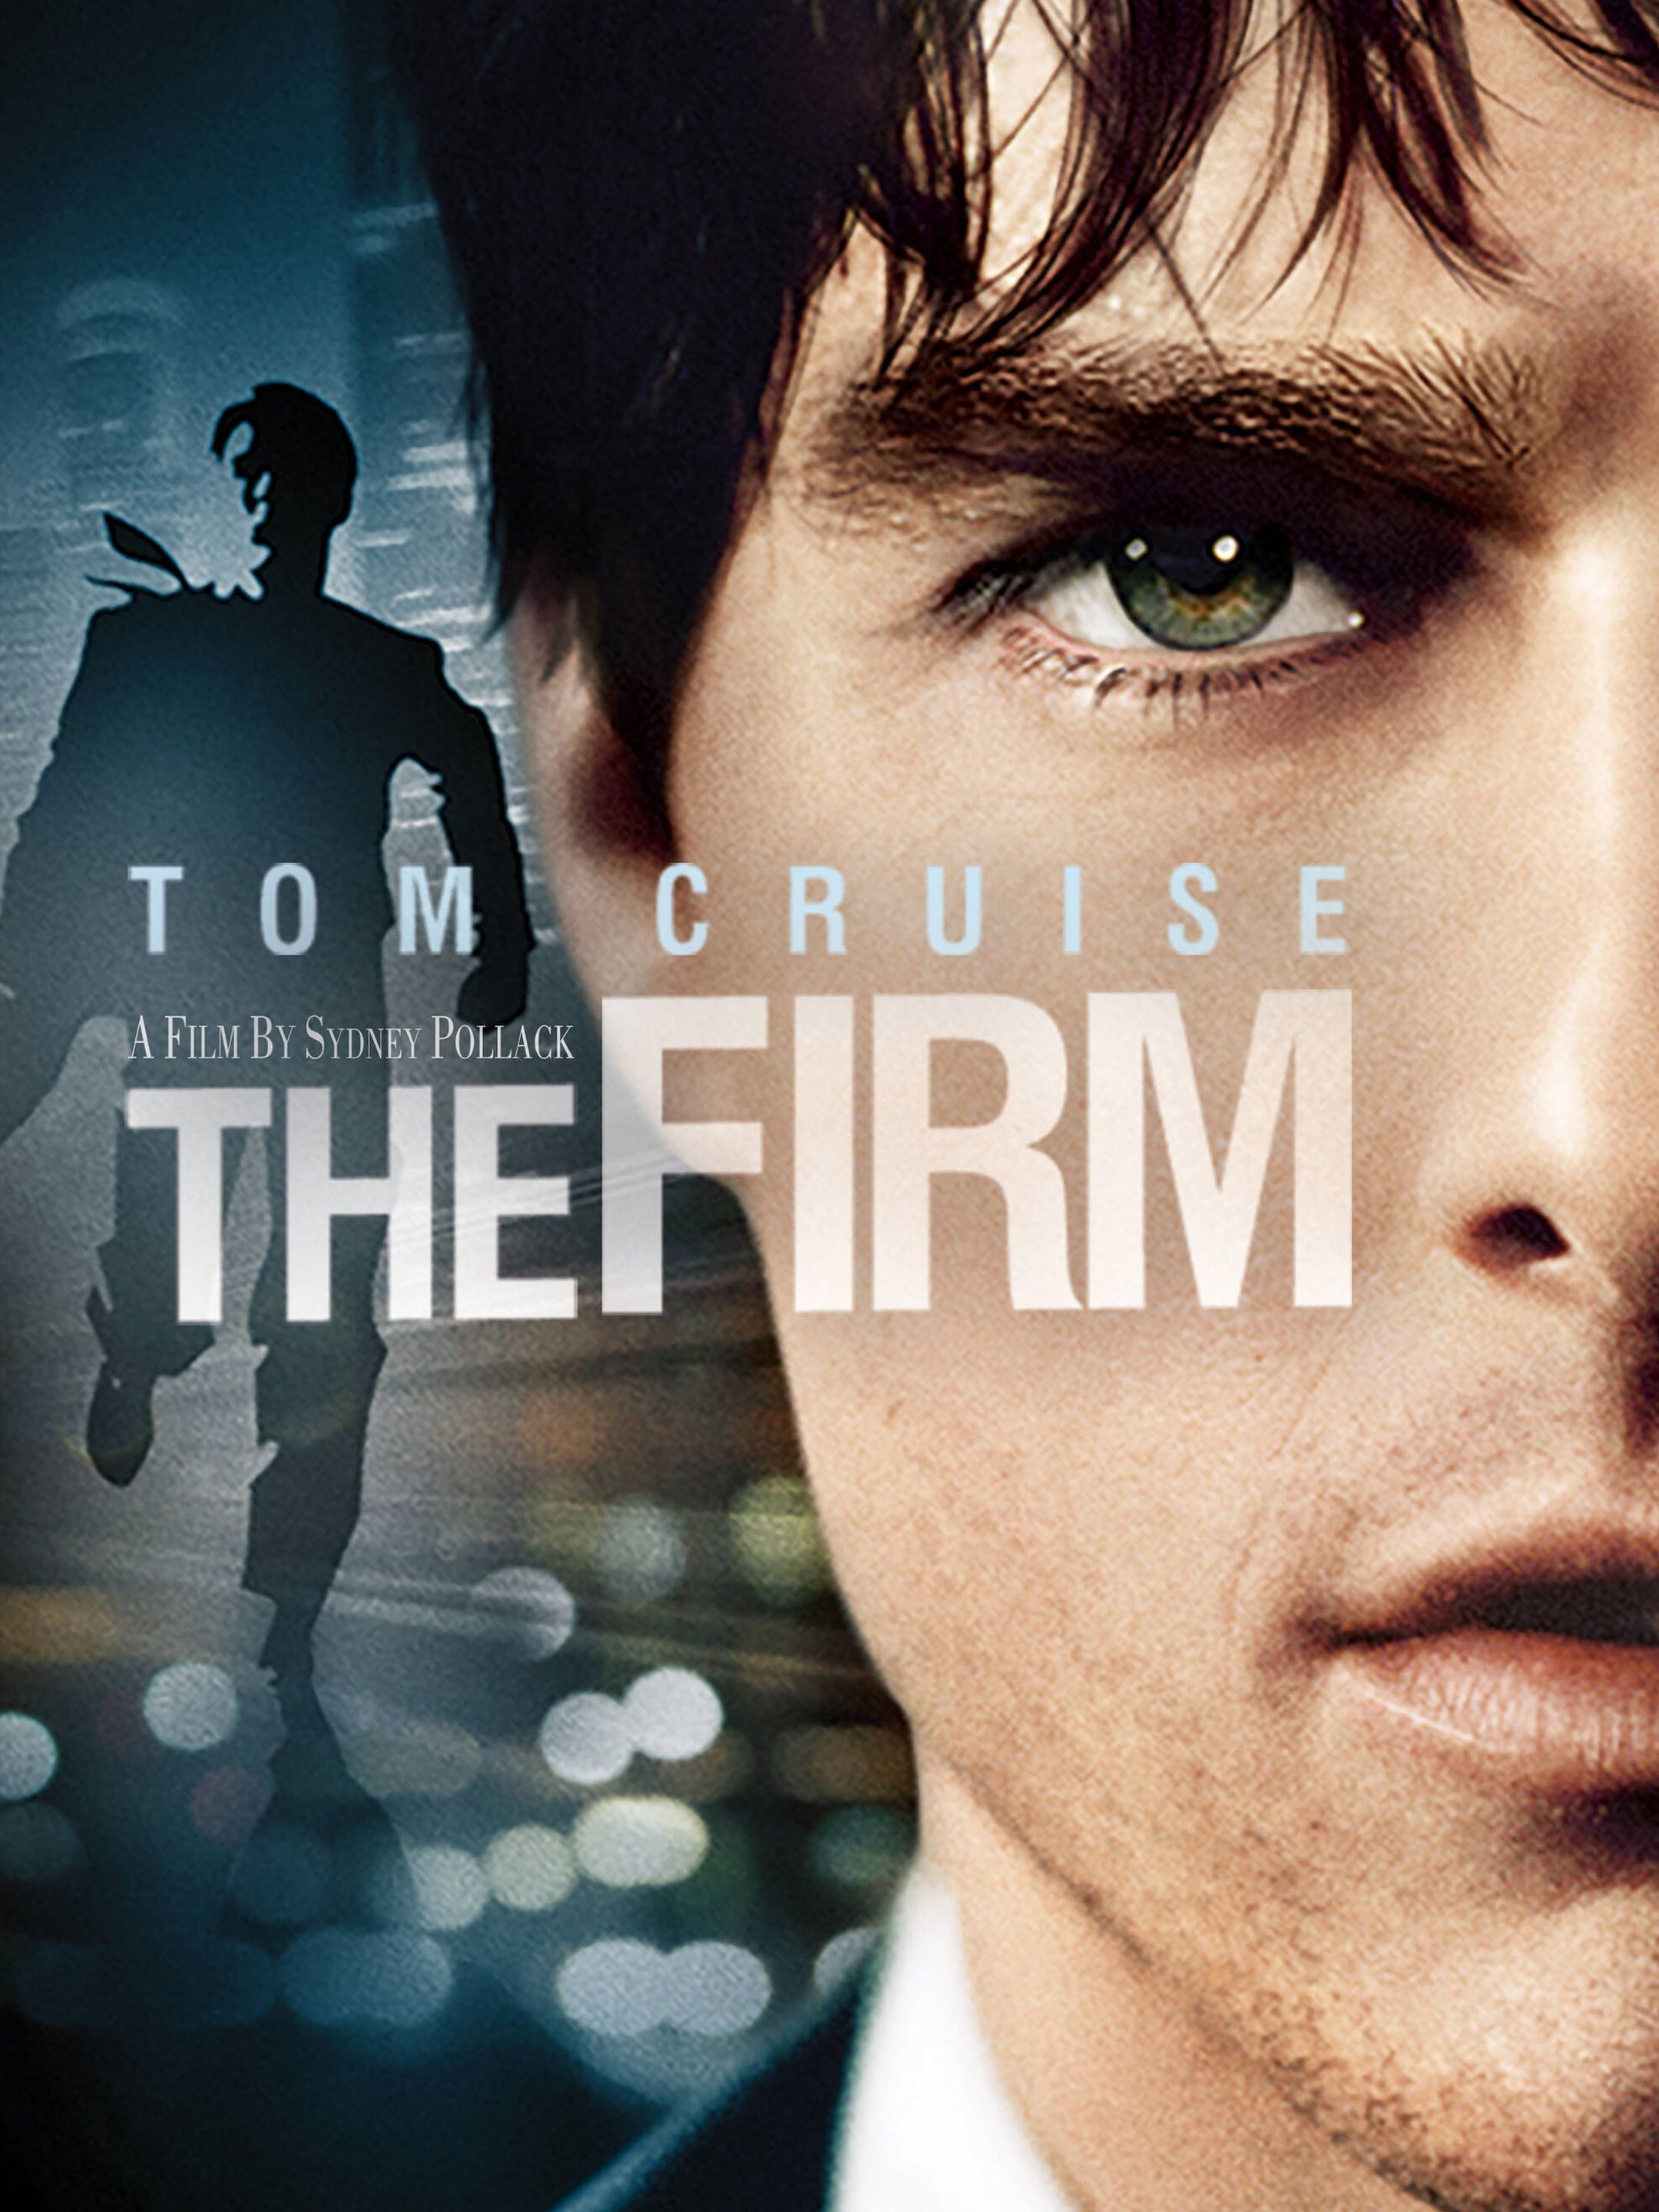 tom cruise film the firm